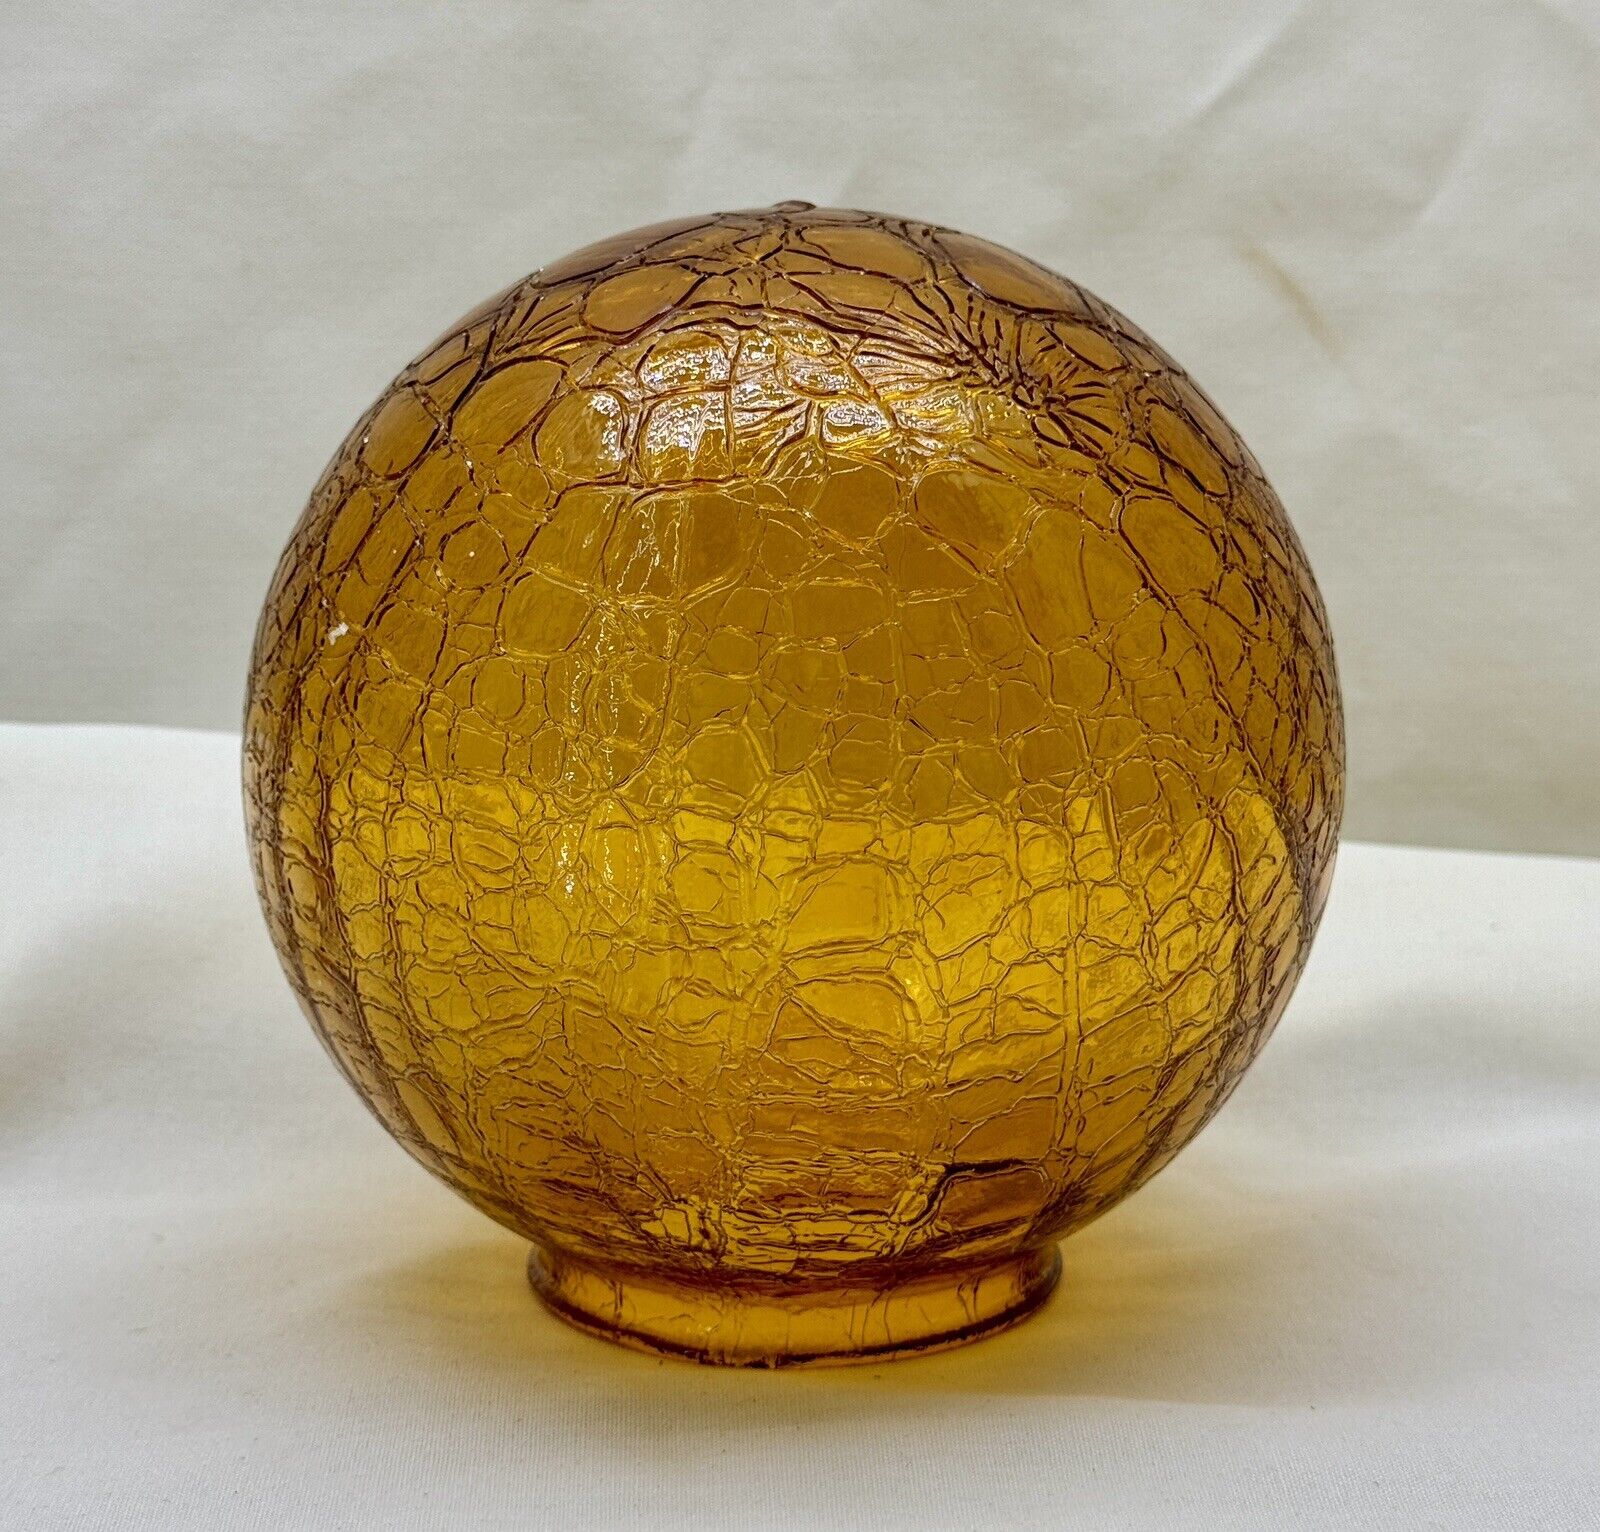 Vintage Mid-Century Amber Crackle Glass Globe Lamp Shade Mid-Century 3” Fitter